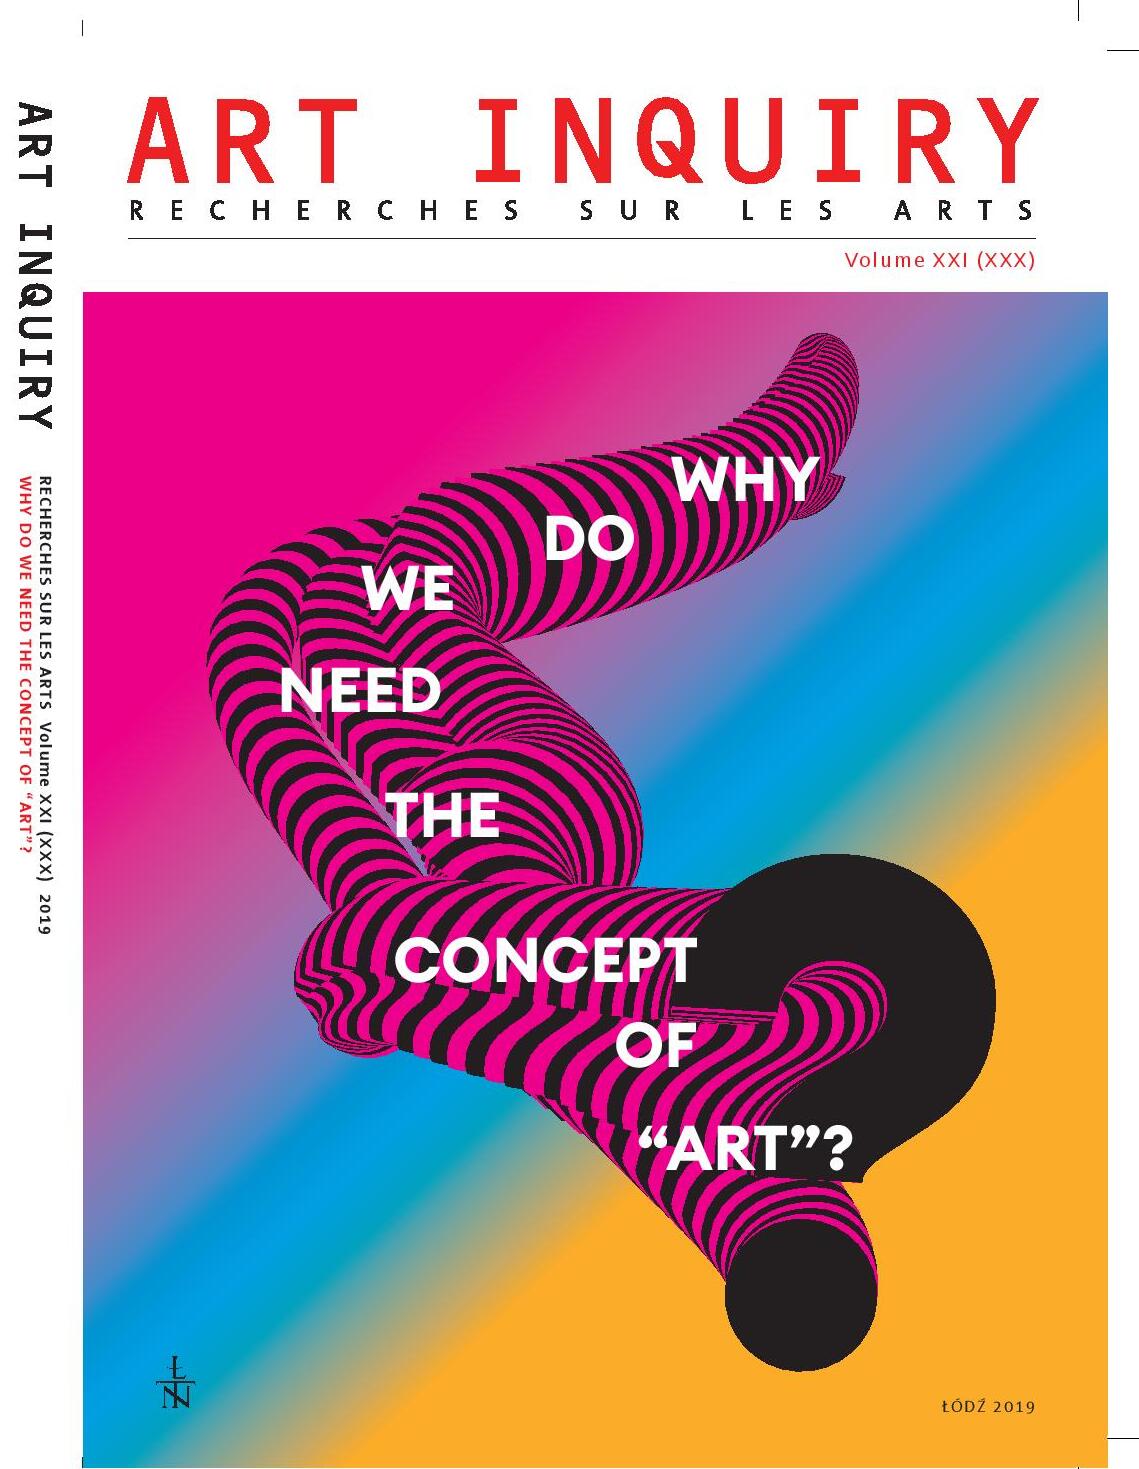 					View Vol. 21 (2019): Why do we need the concept of “art”?
				